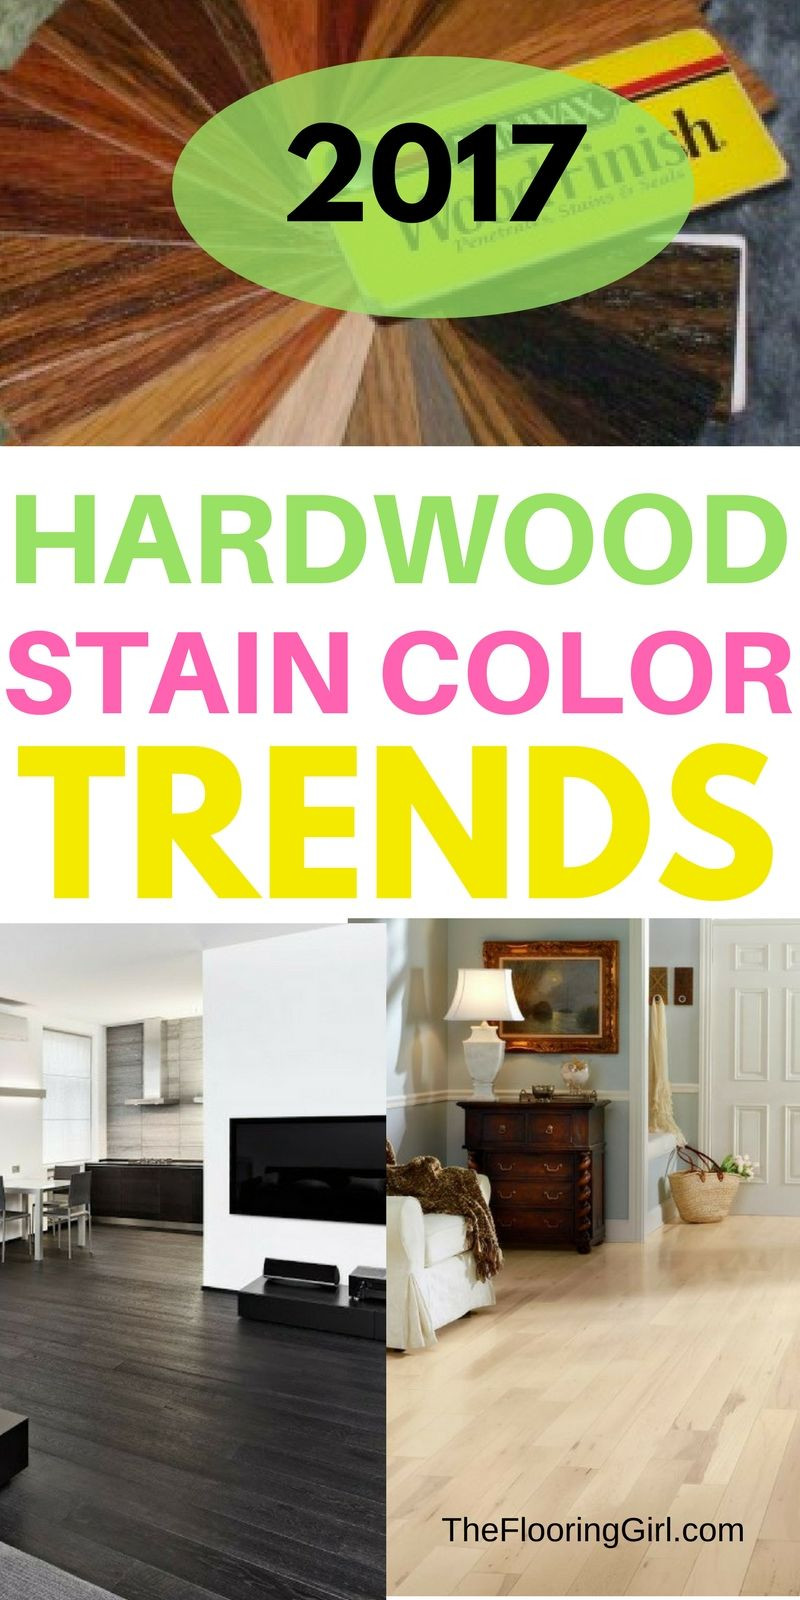 14 Unique Homes with Different Color Hardwood Floors 2024 free download homes with different color hardwood floors of hardwood flooring stain color trends 2018 more from the flooring with regard to hardwood flooring stain color trends for 2017 hardwood colors th